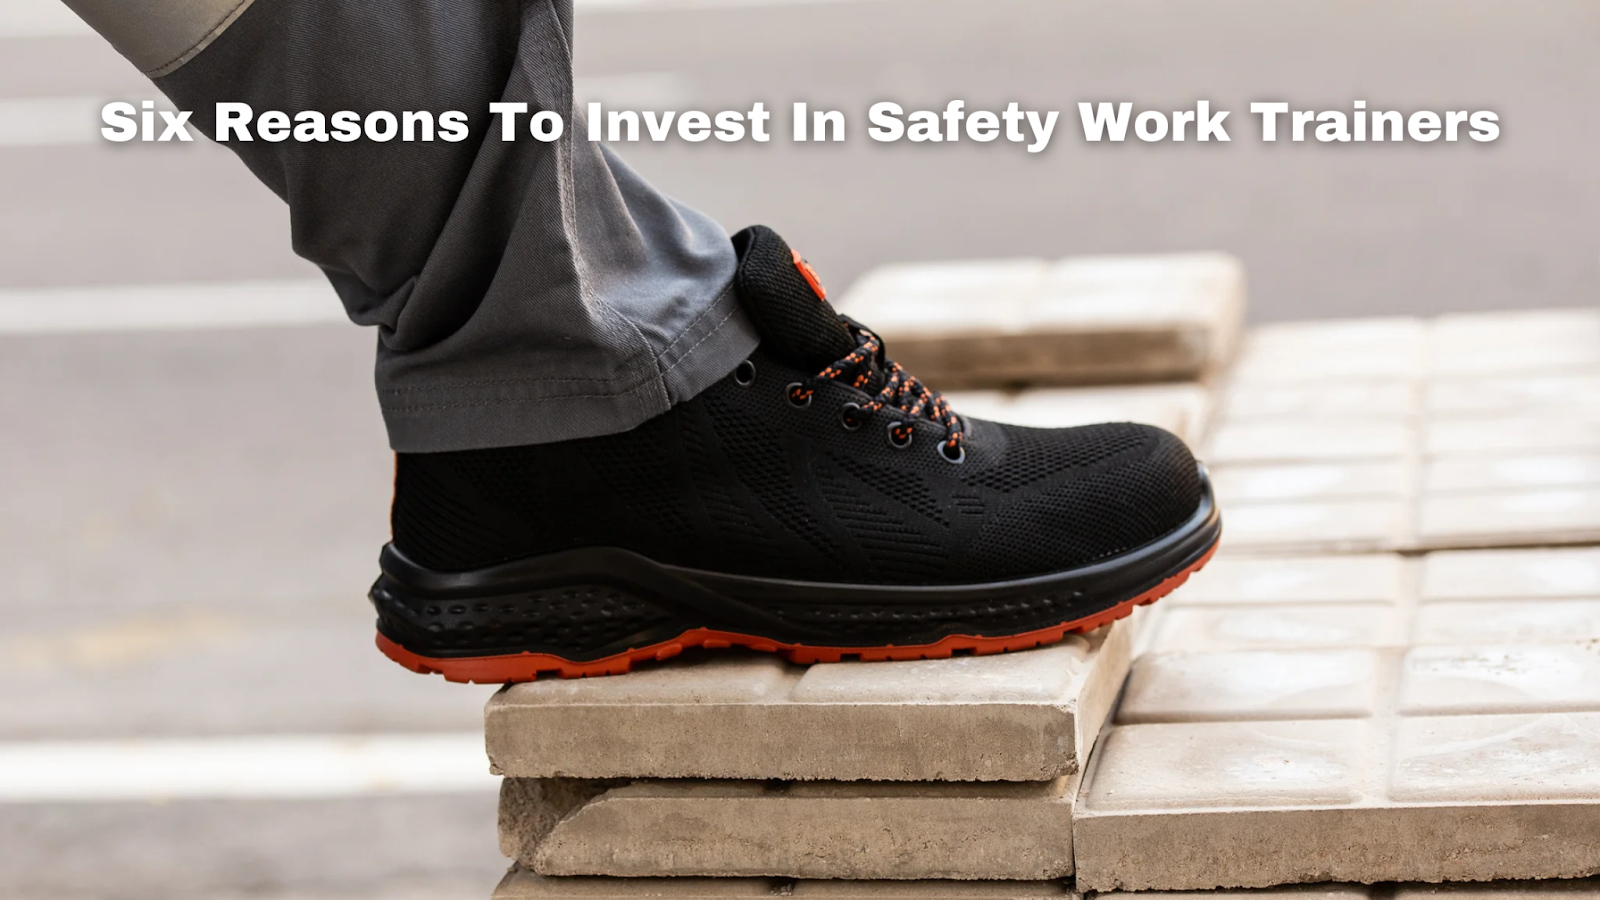 Six Reasons To Invest In Safety Work Trainers